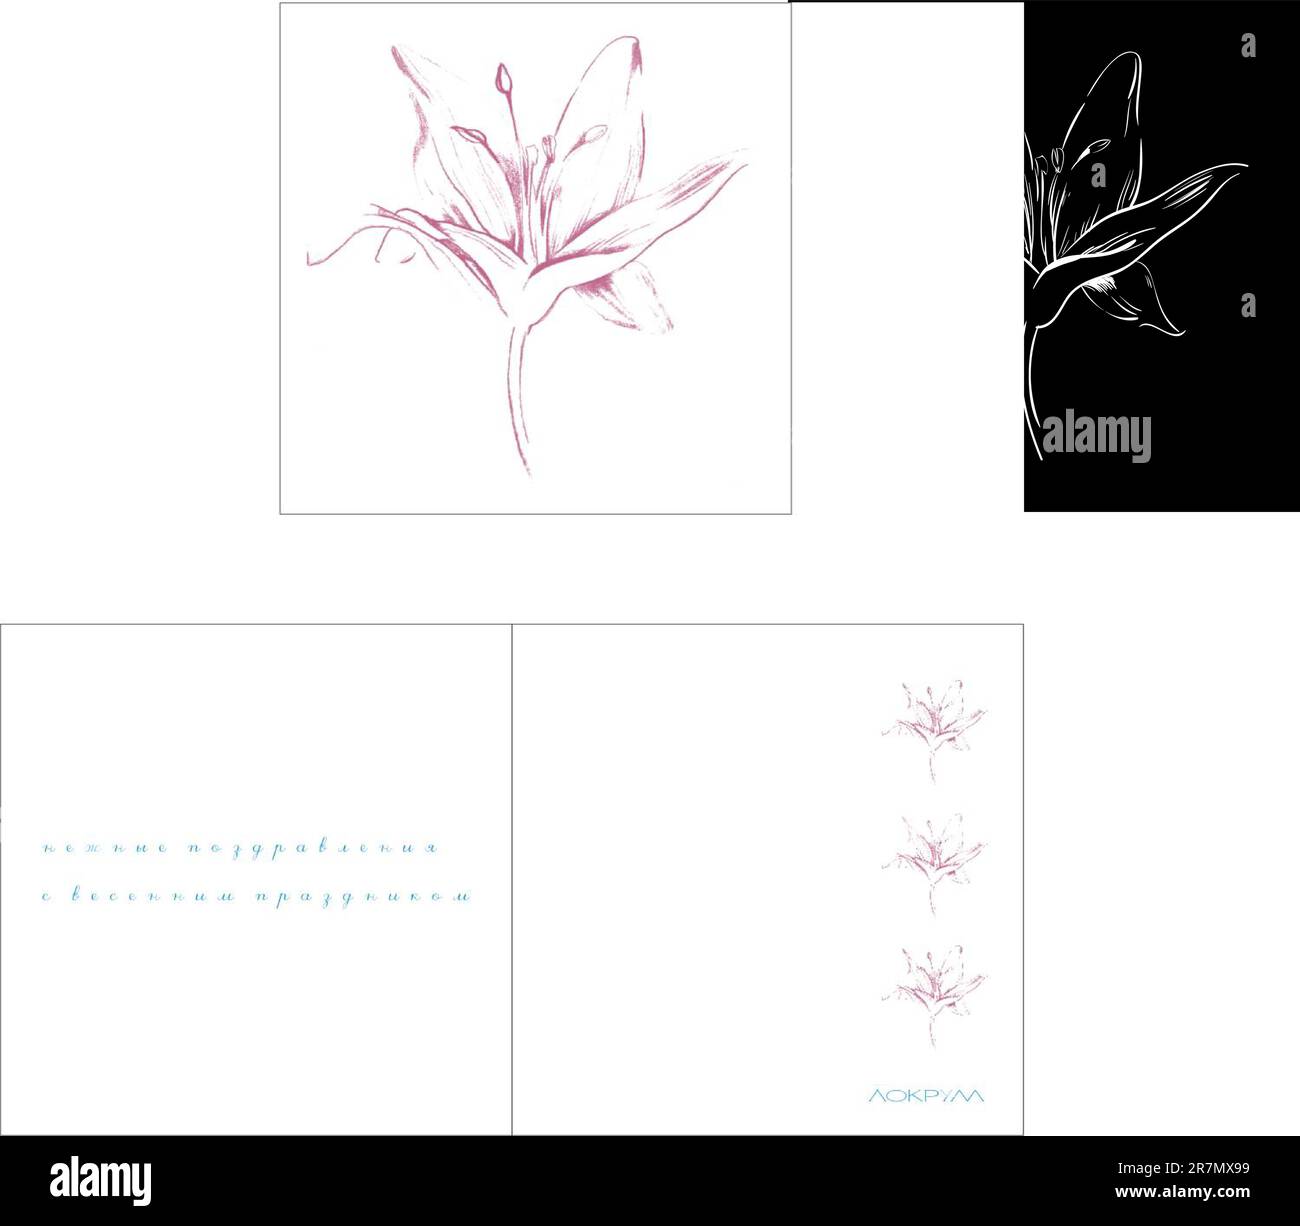 Vector image of lilies on a black background Stock Vector